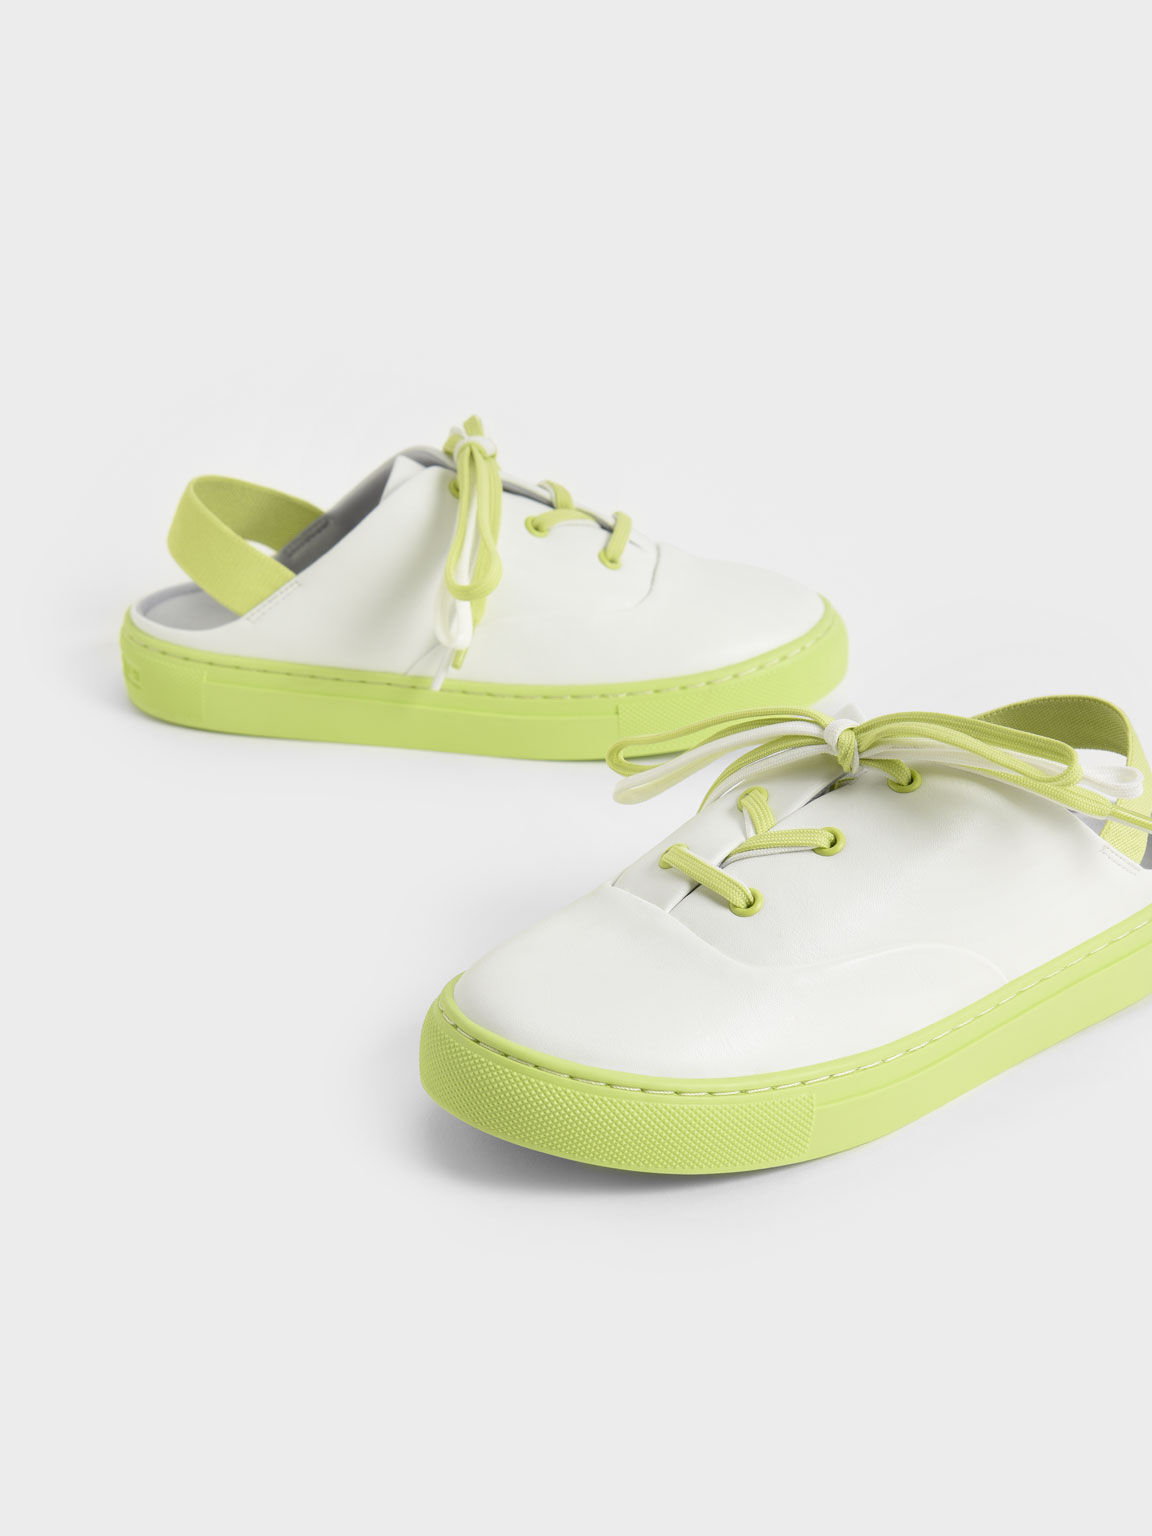 Girls' Two-Tone Lace-Up Sneaker Mules, Lime, hi-res